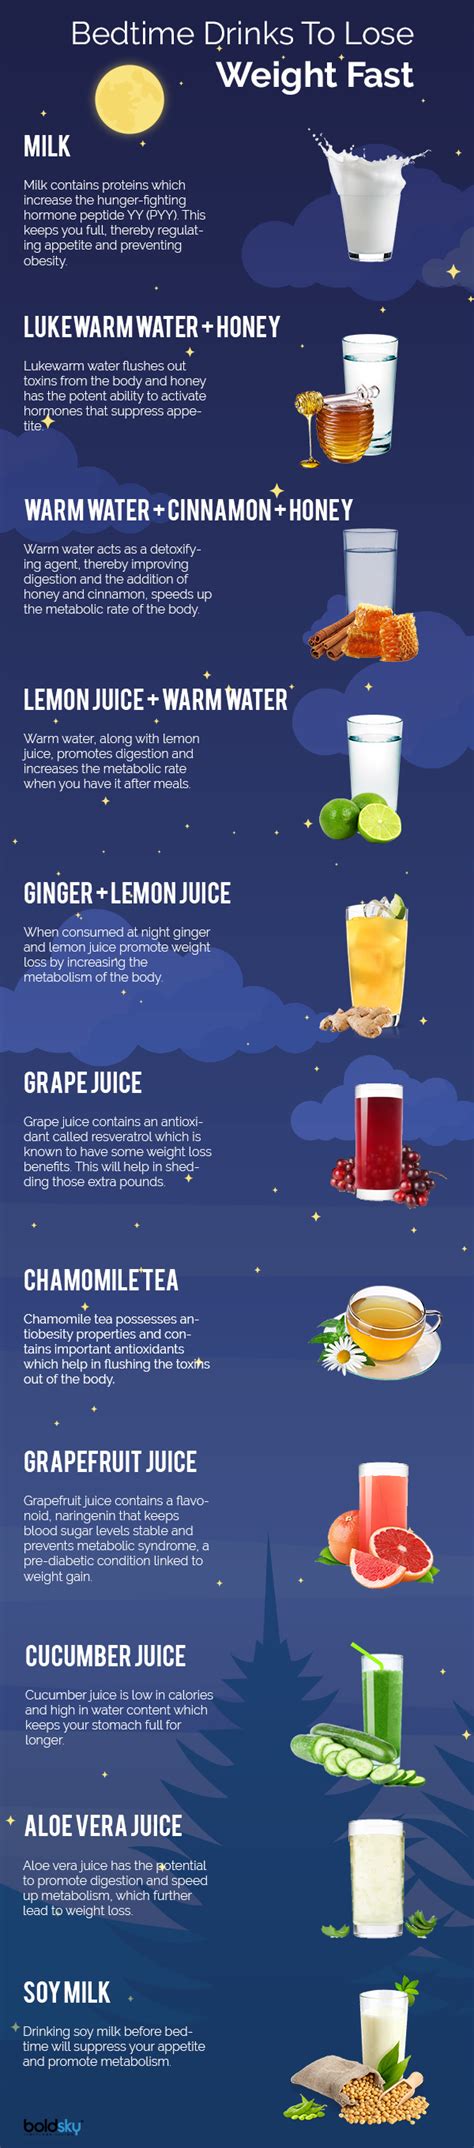 11 Powerful Bedtime Drinks To Lose Weight Fast